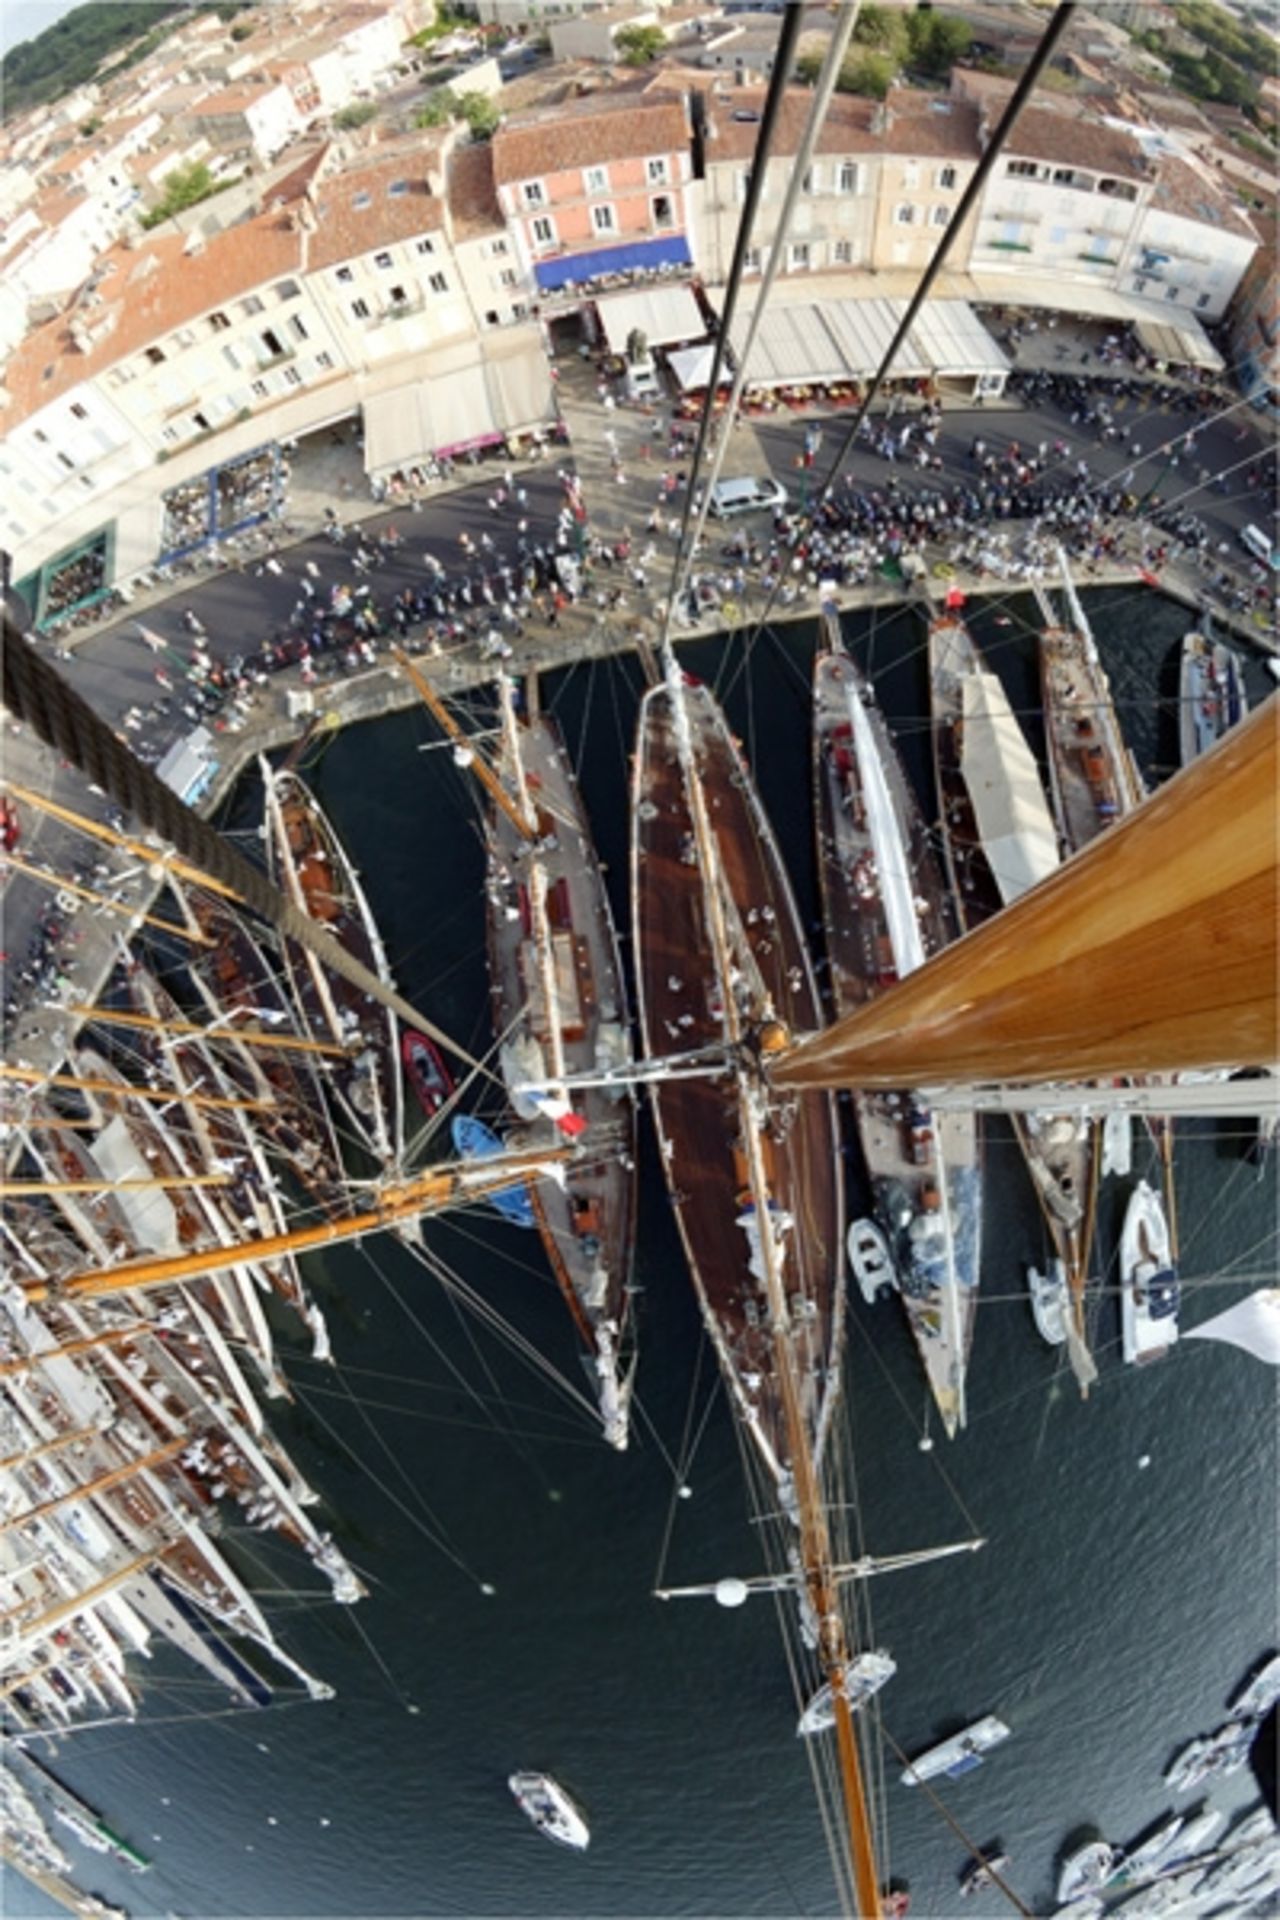 Kos photographed Saint Tropez harbor from the top of 52 meter schooner Eleonora. "Whilst guest and crew were chatting on deck and strollers gathered on the promenade, I donned a harness and was hoisted 45 meters aloft," she said.